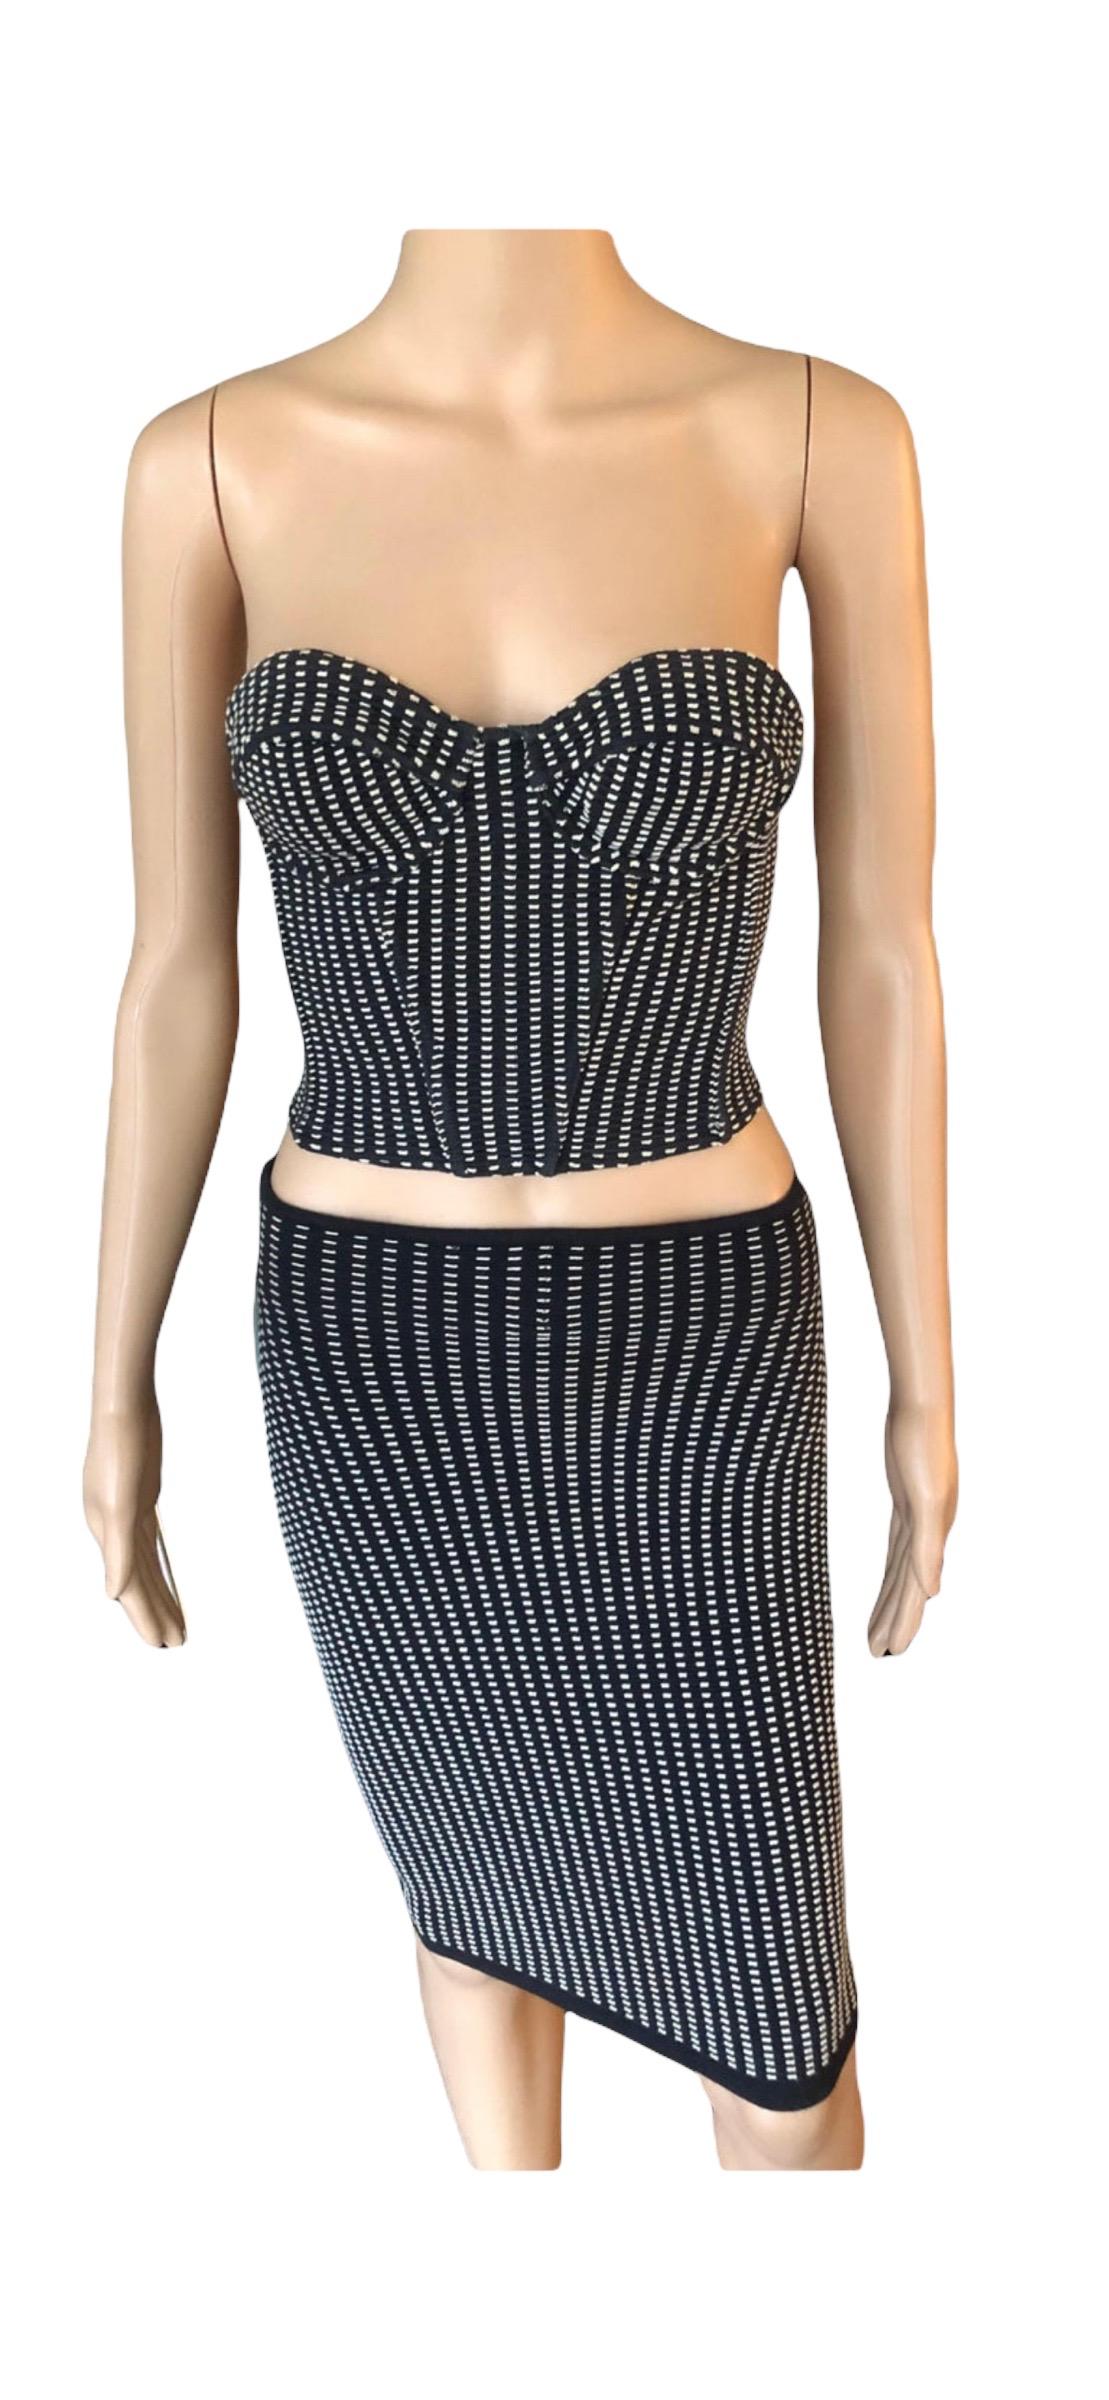 Azzedine Alaia S/S 1991 Vintage Skirt and Bustier Crop Top 2 Piece Set  4